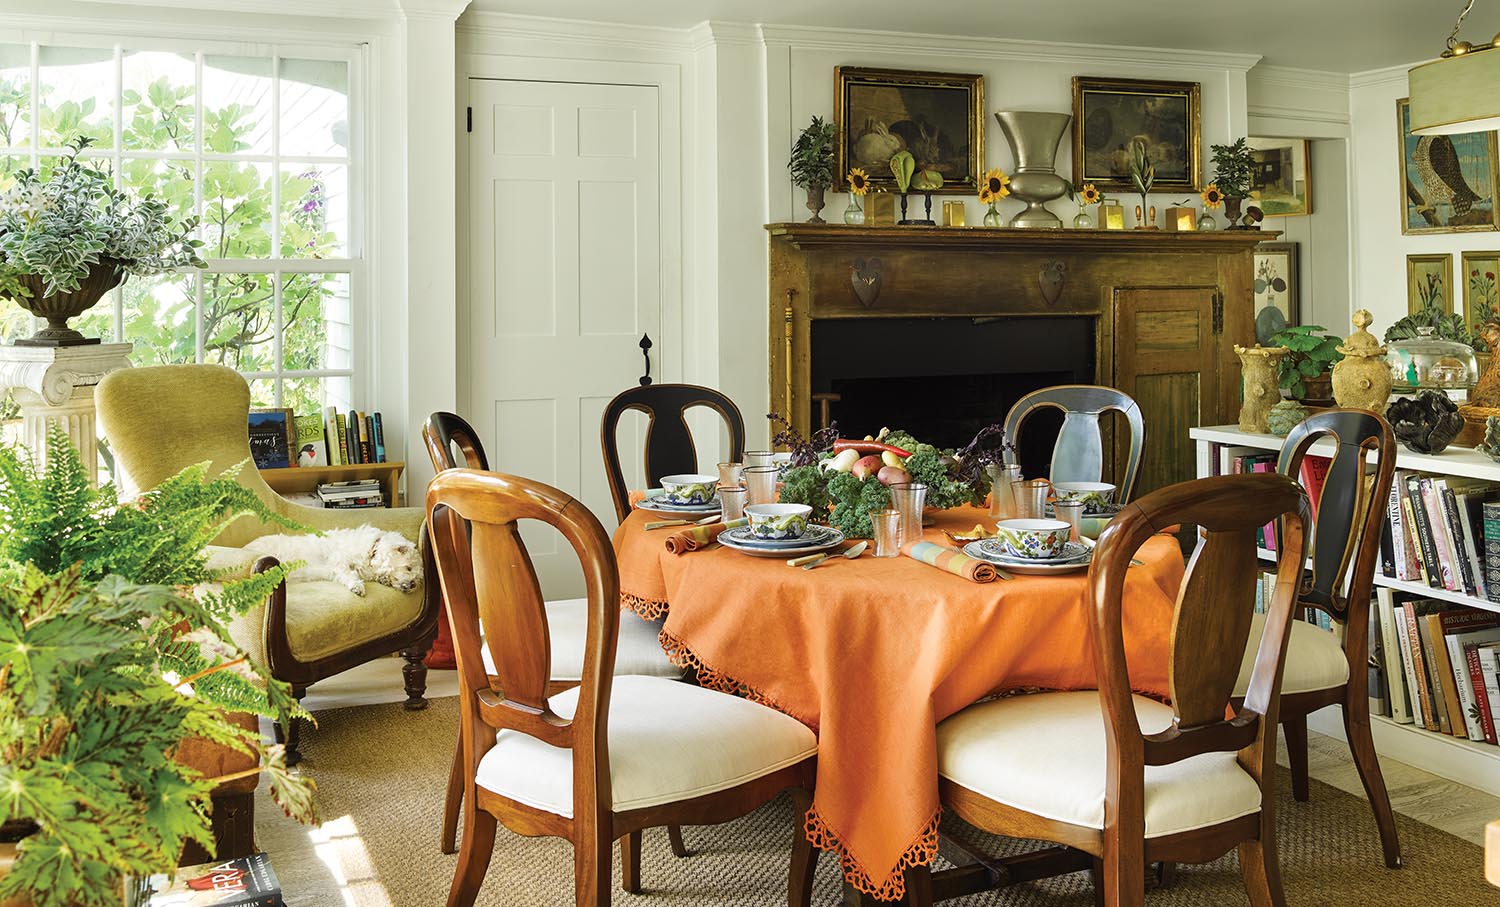 A round table is set up near a fireplace with an orange tablecloth and is set for tea.